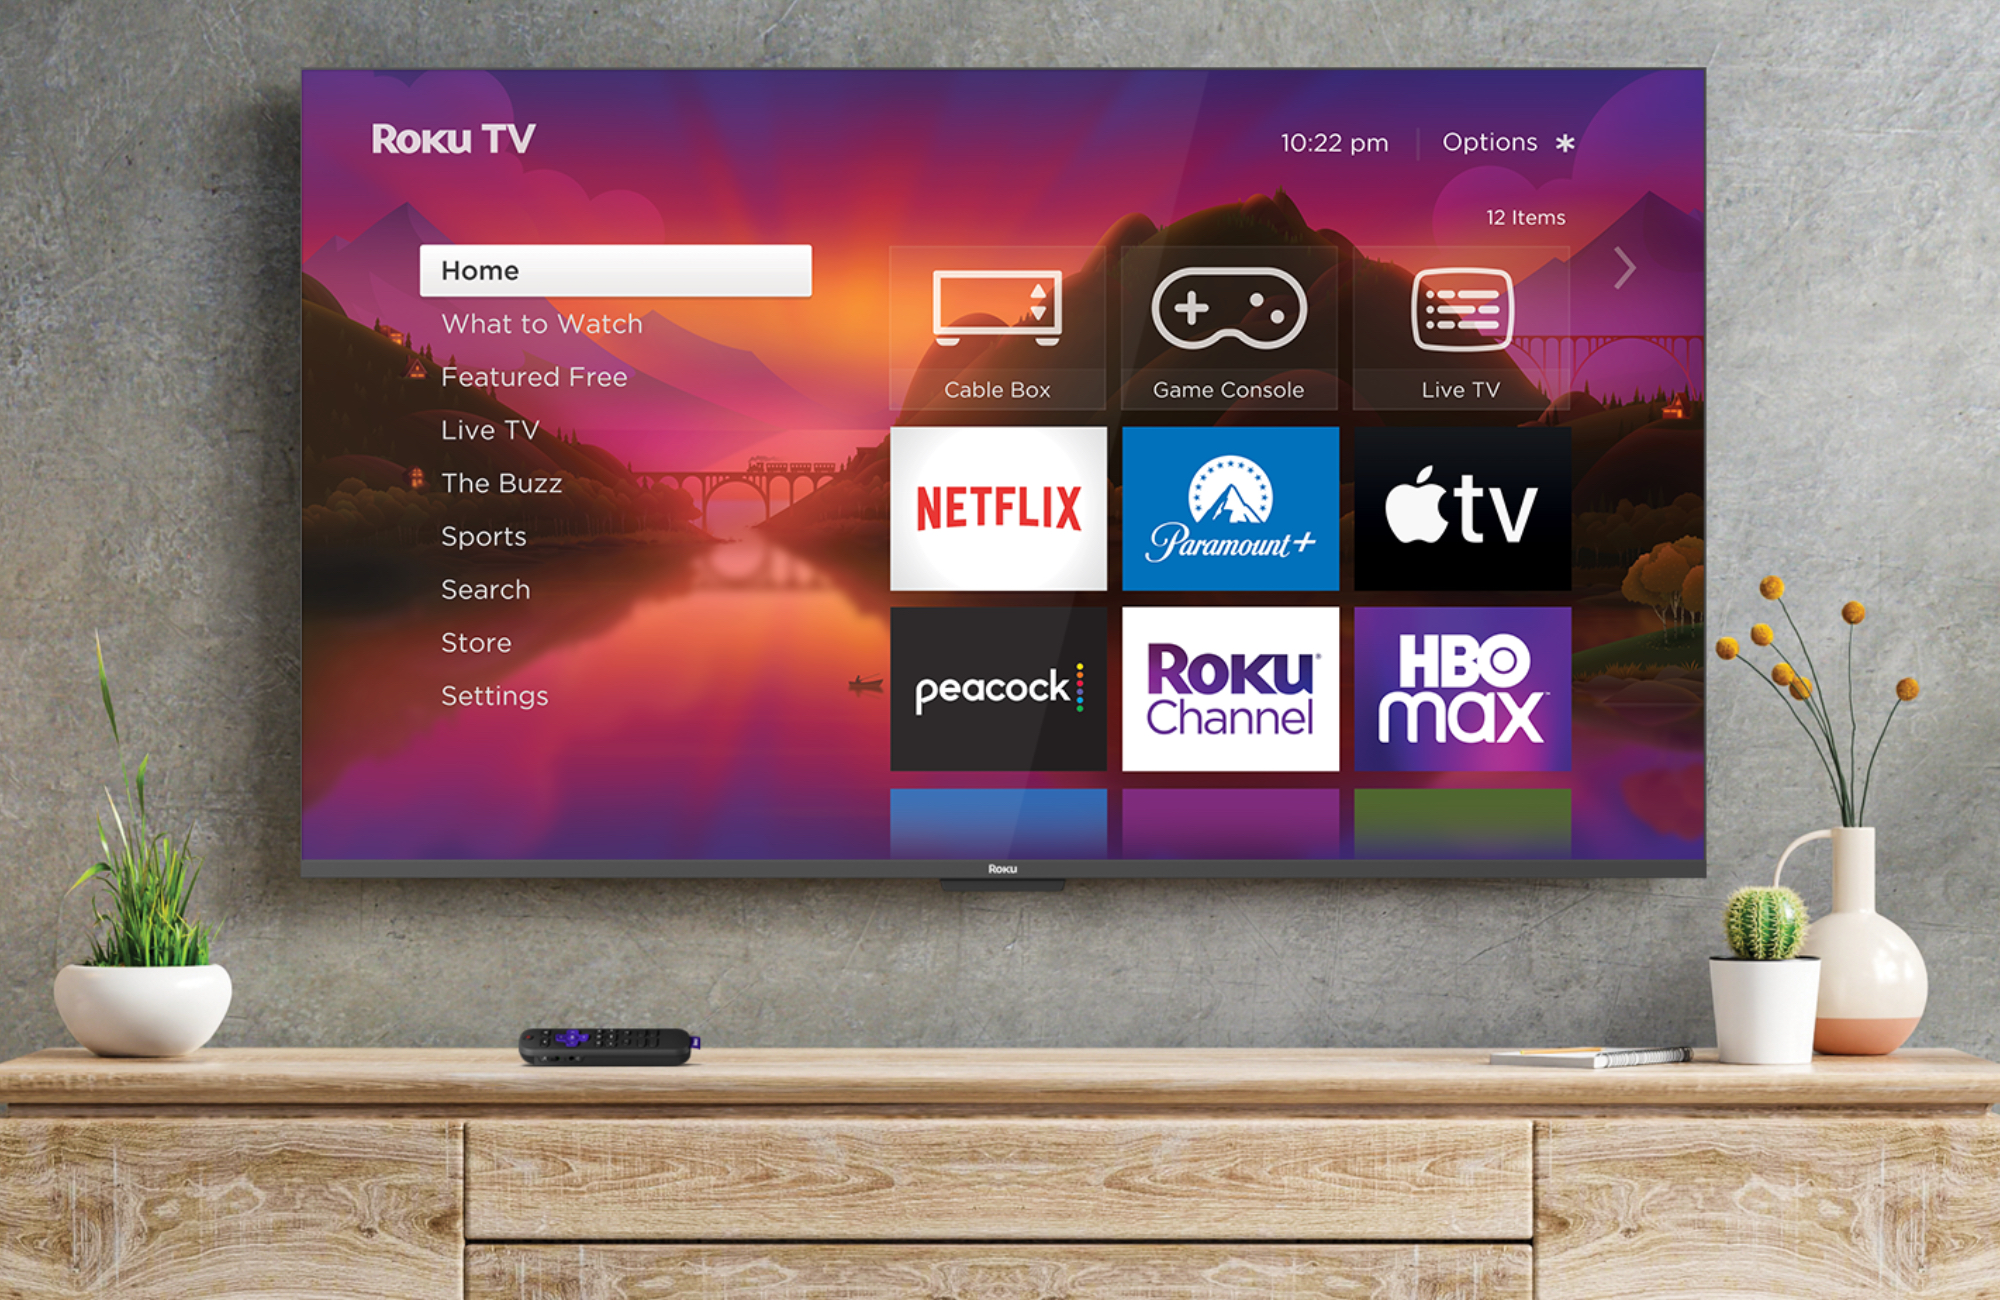 Roku announces its first TVs at CES 2023